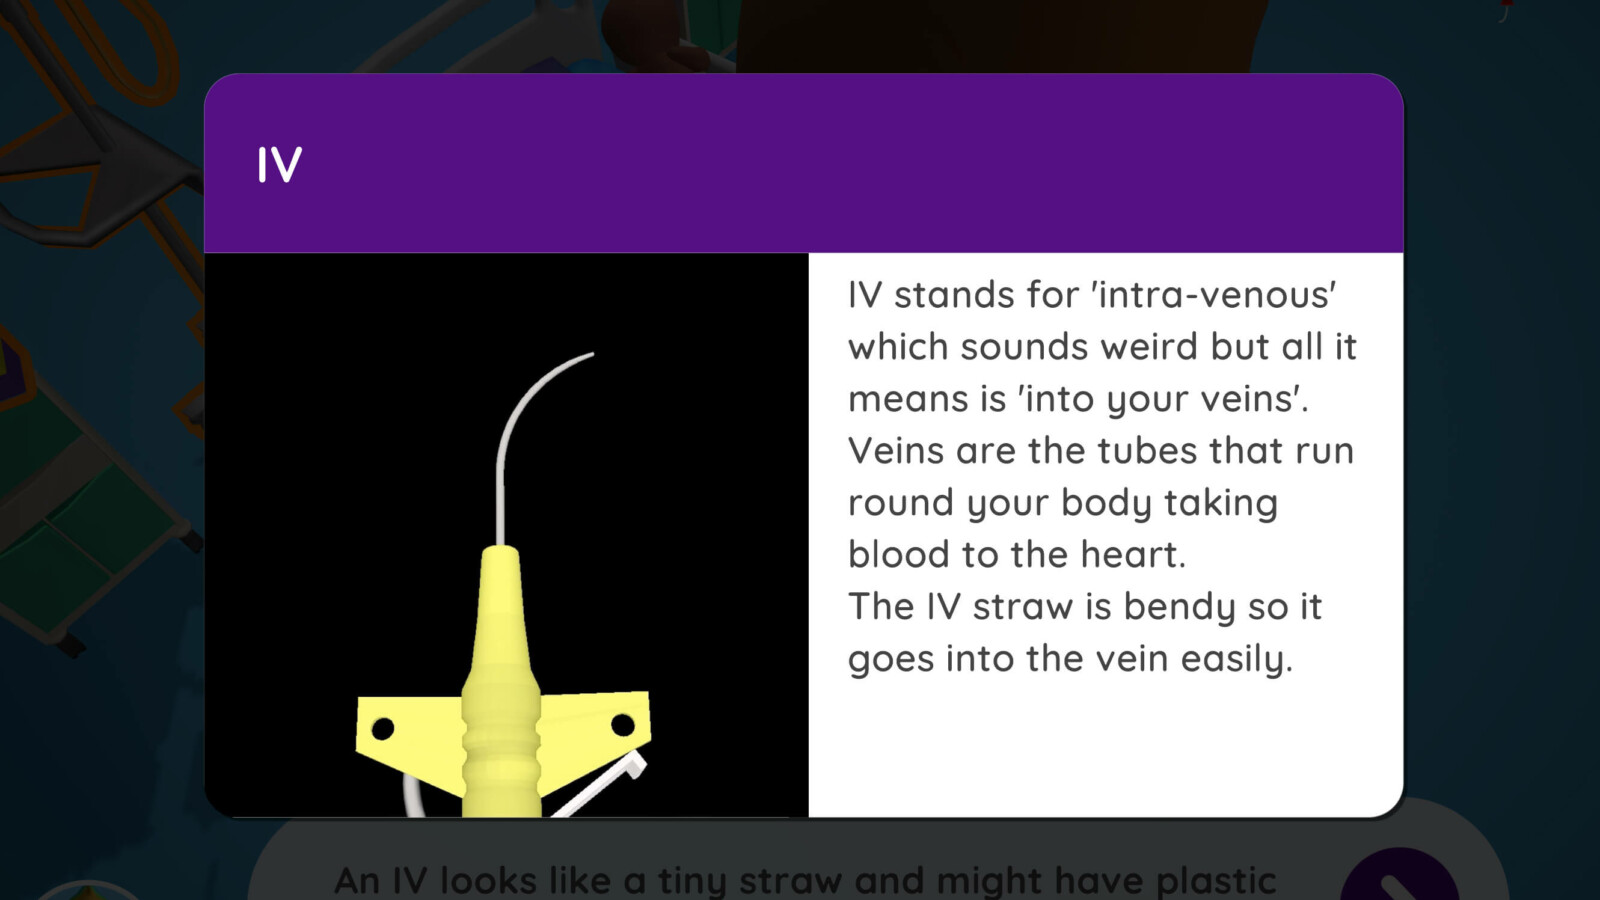 Overlay showing that IVs are like bendy straws